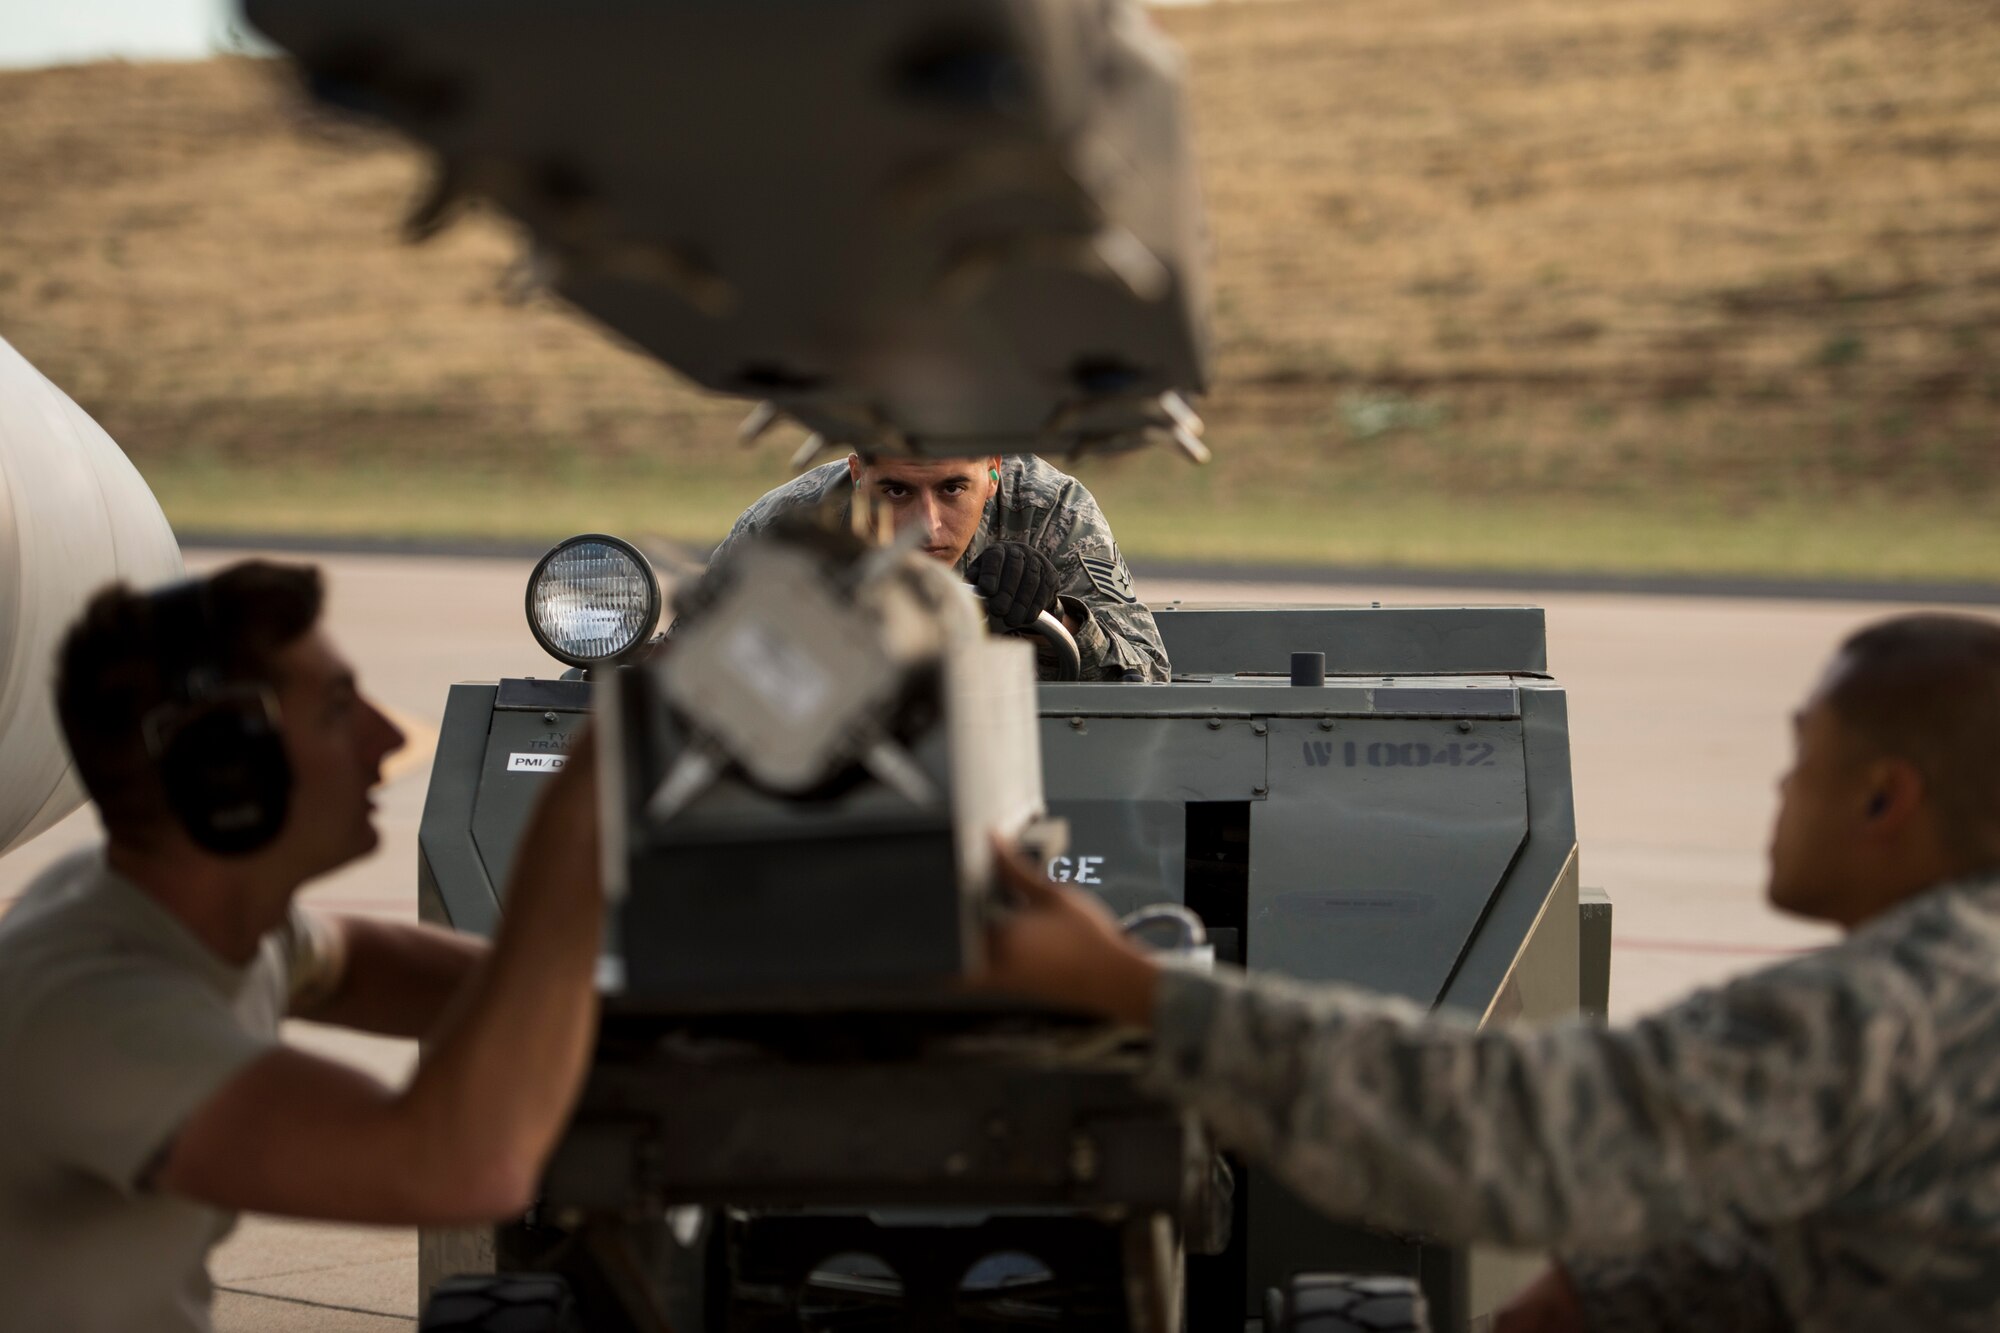 Senior Airman Jason Nonog prepares an F-16 Fighting Falcon for takeoff Aug. 13, 2014, during an air-to-ground exercise at Hill Air Force Base, Utah. The Weapons System Evaluation Program is an annual training exercise where the effectiveness, maintainability, suitability and accuracy of guided munitions are evaluated. The 510th Fighter Squadron from Aviano Air Base, Italy, and the 494th FS from Royal Air Force Lakenheath, England, joined the 388th Fighter Wing at Hill AFB, for the exercise. (U.S. Air Force photo/Airman 1st Class Taylor Queen)